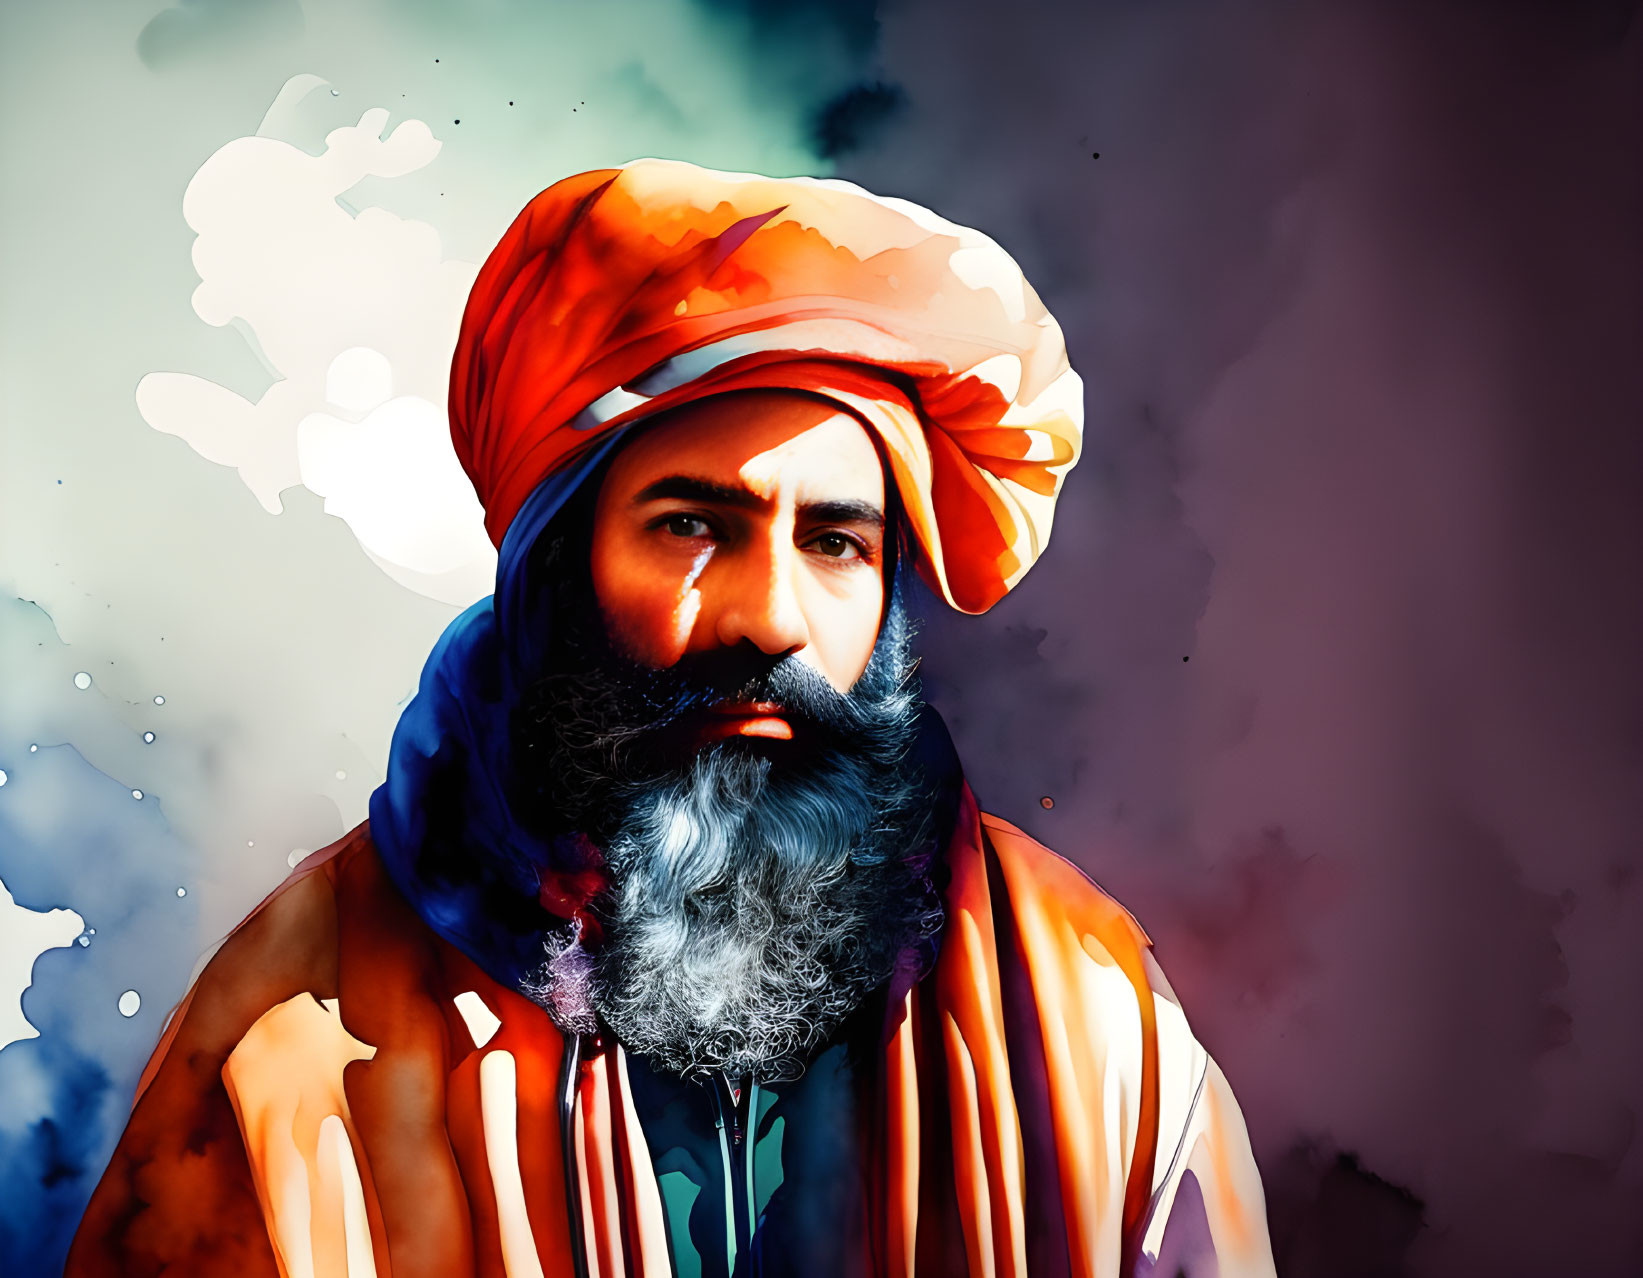 Colorful digital artwork: Bearded man in turban, vibrant oranges and blues, bold strokes,